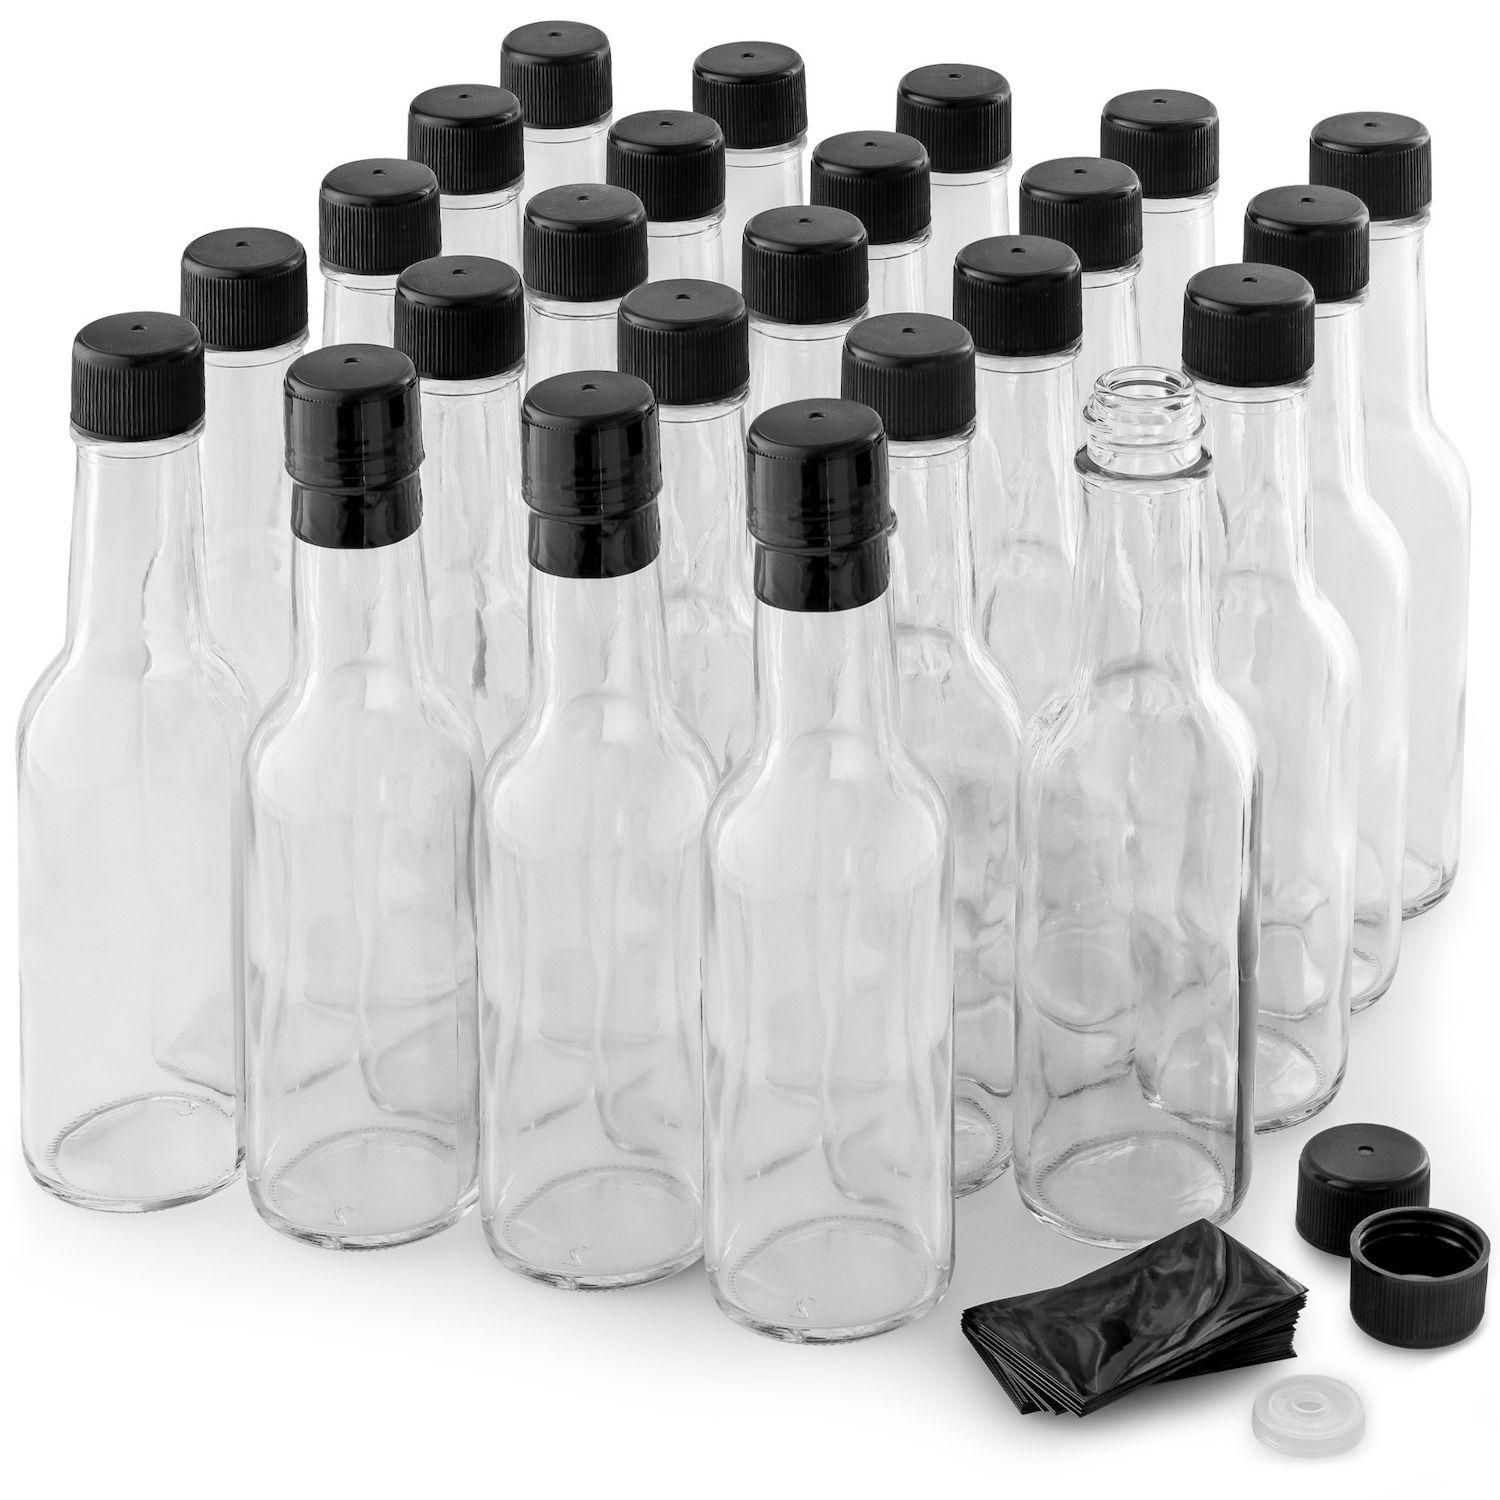 JoyJolt Spring Glass Fluted Water Bottles with Stainless Steel Cap - 18 oz  - Set of 6, 18 oz - Foods Co.